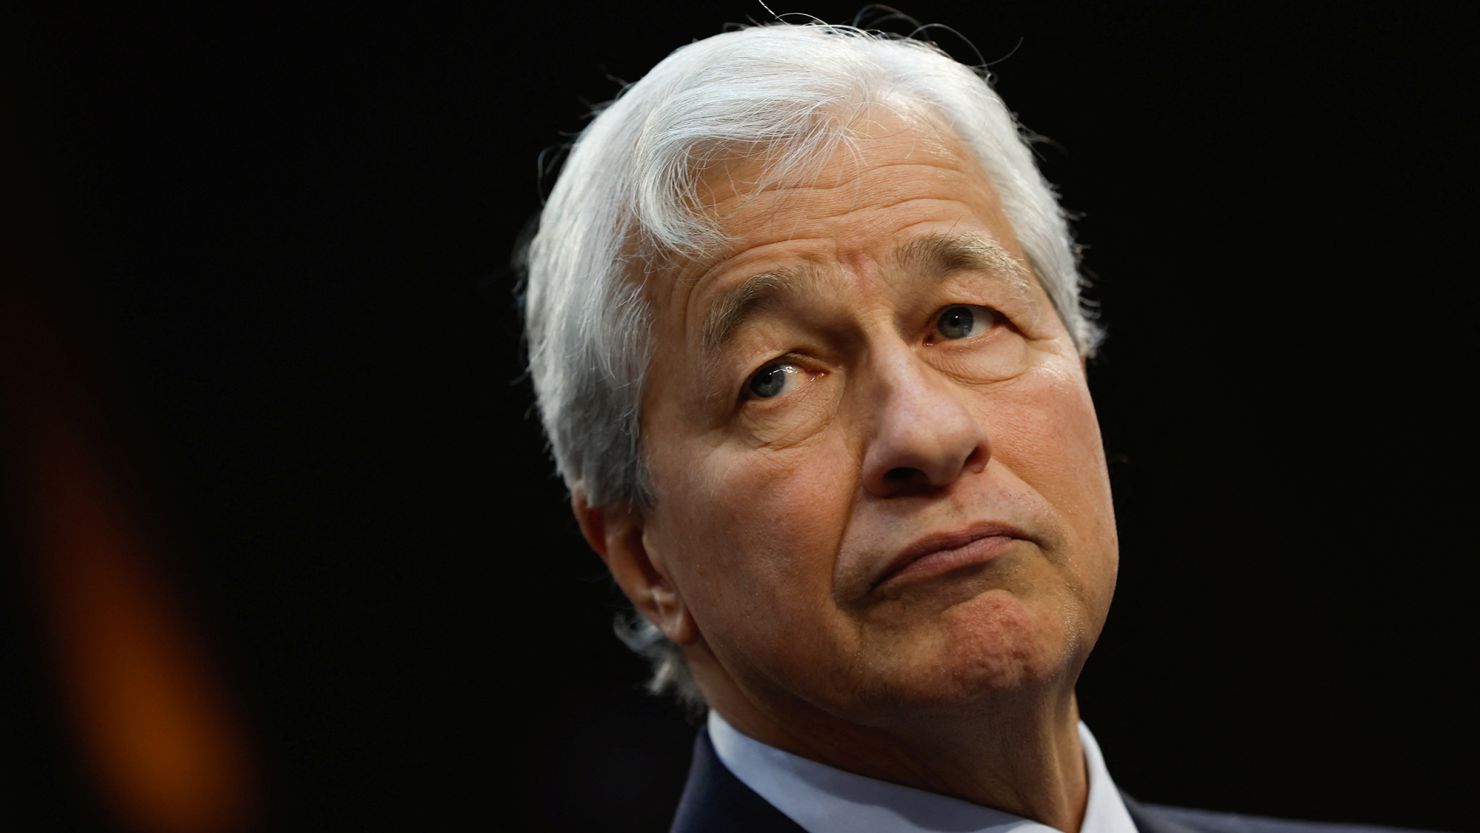 JPMorgan Chase CEO and Chairman Jamie Dimon is worried about the rise of private equity in the US.